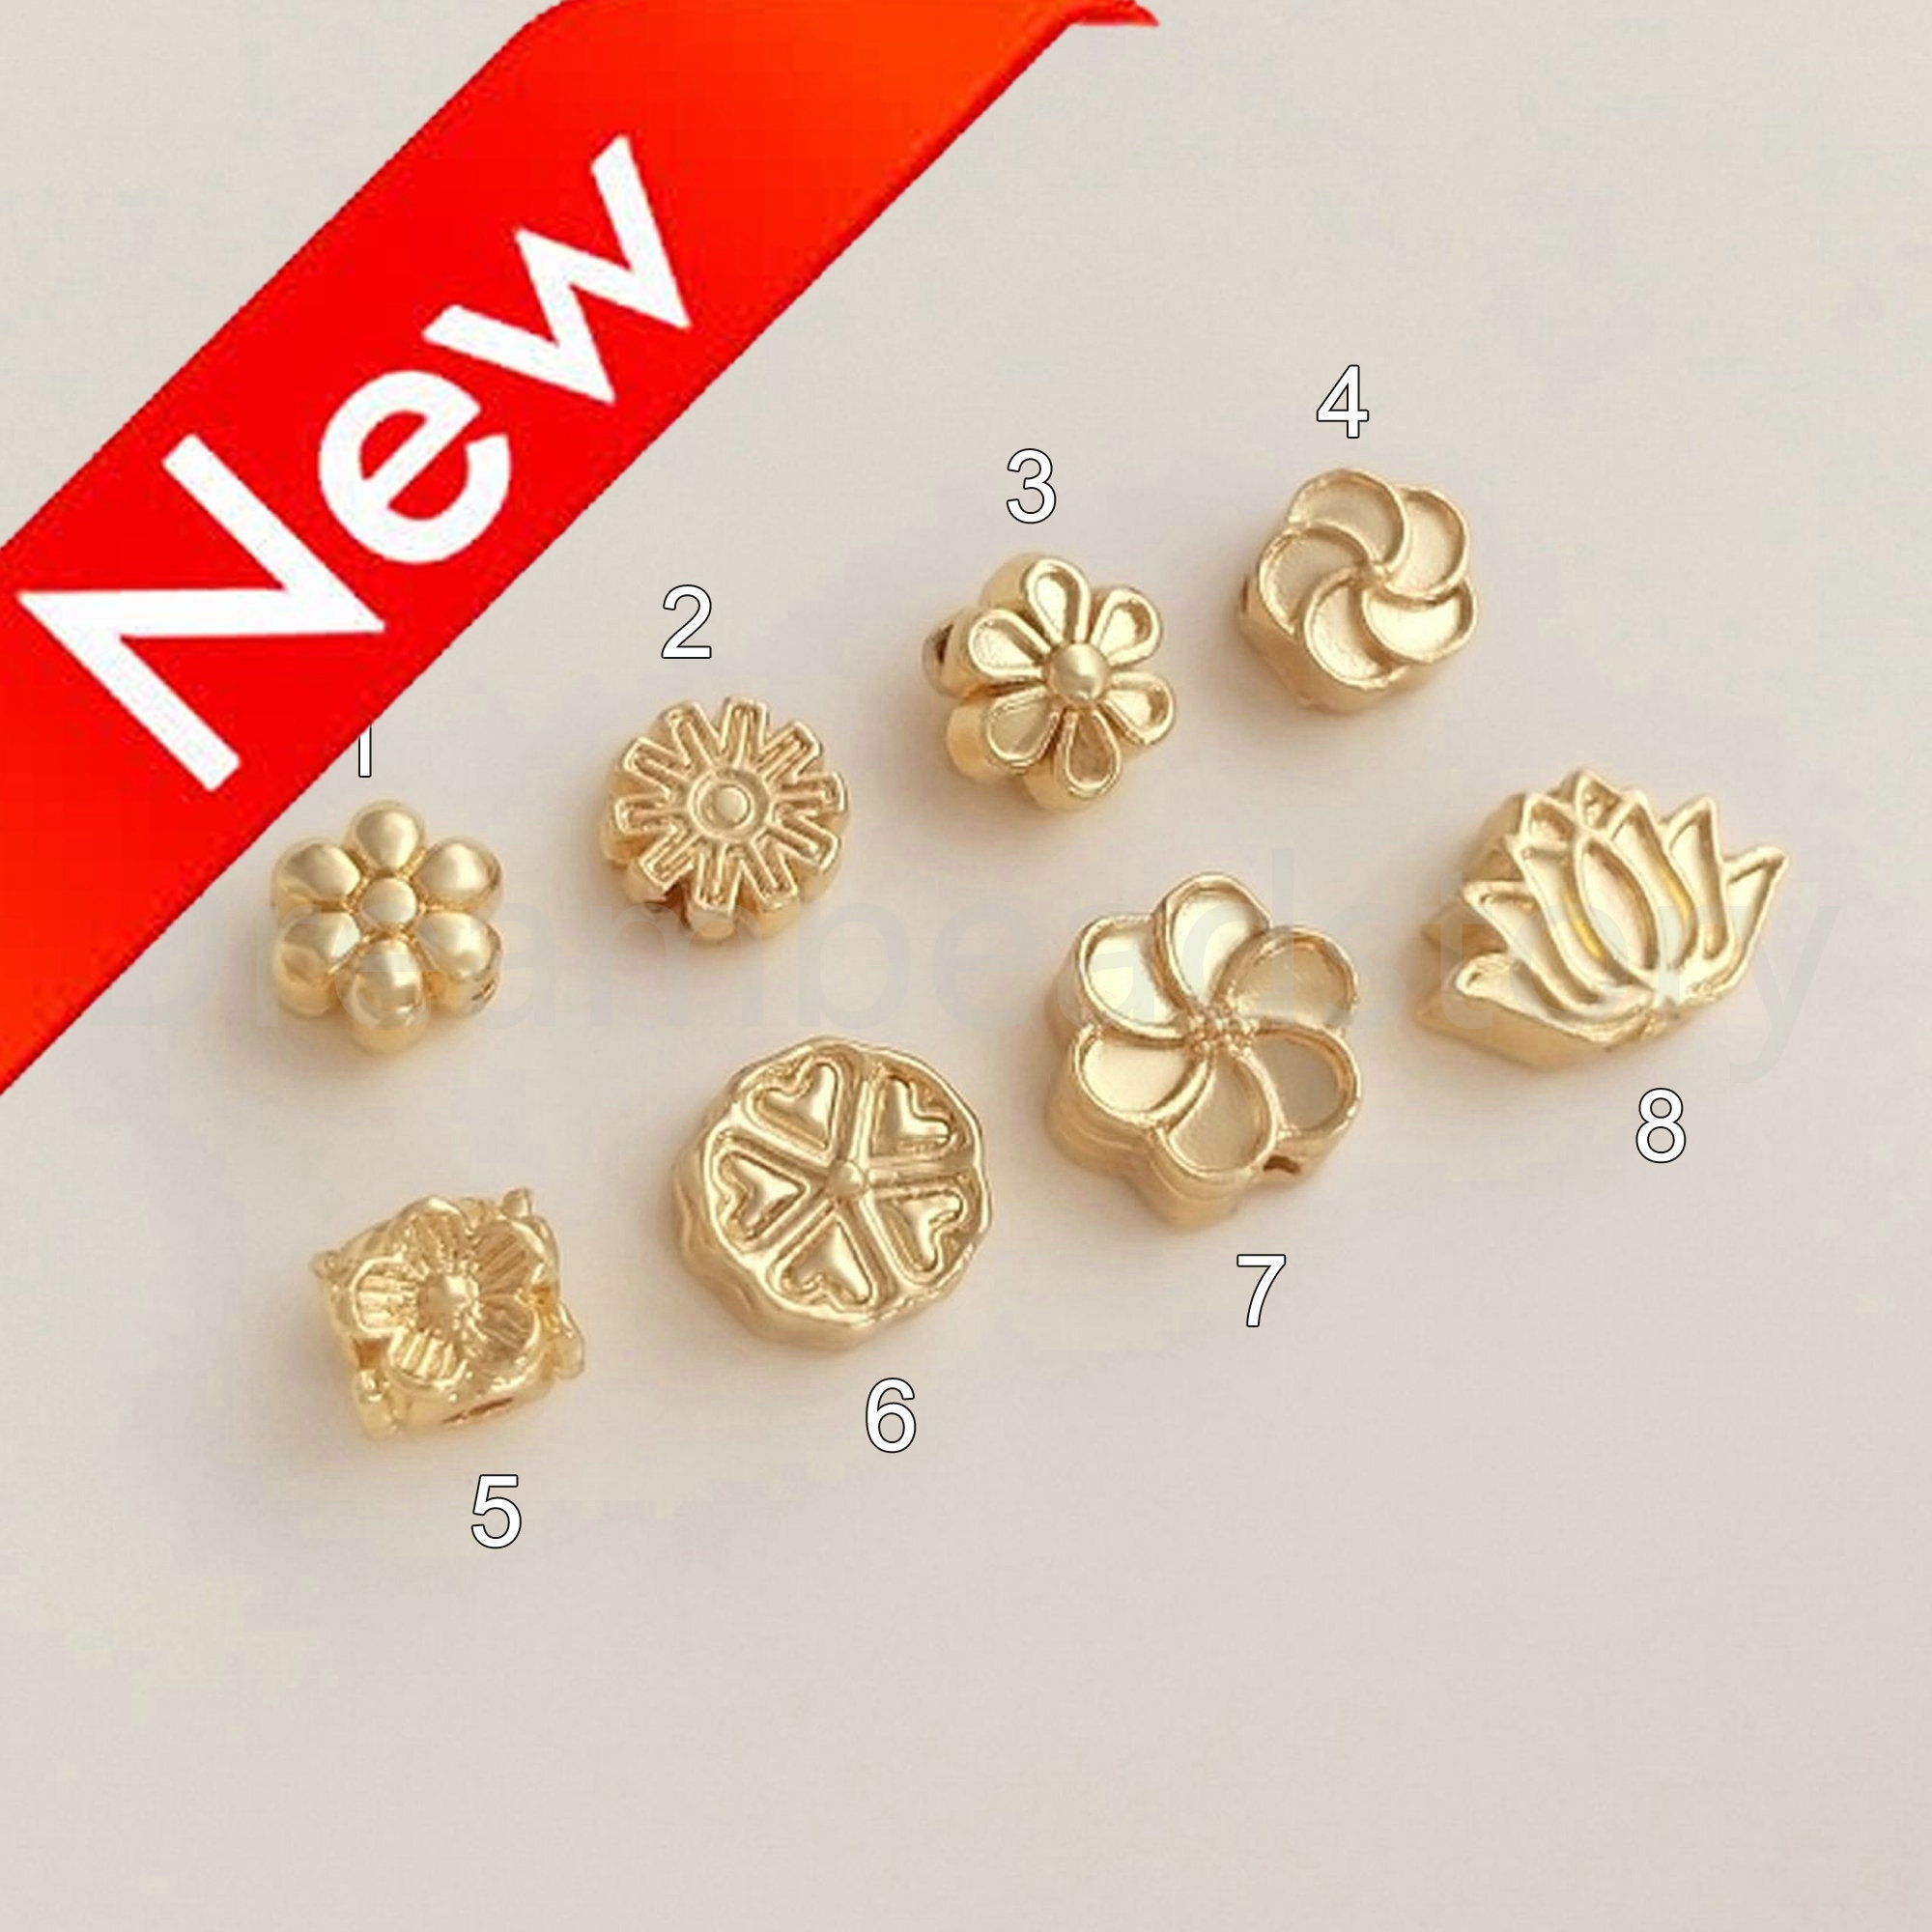 Flat Round Spacer Beads, Gold Filled Gear Shaped Spacer Bead for Bracelet  Necklace Supply, Big Hole Rondelle Spacer Beads, SP097